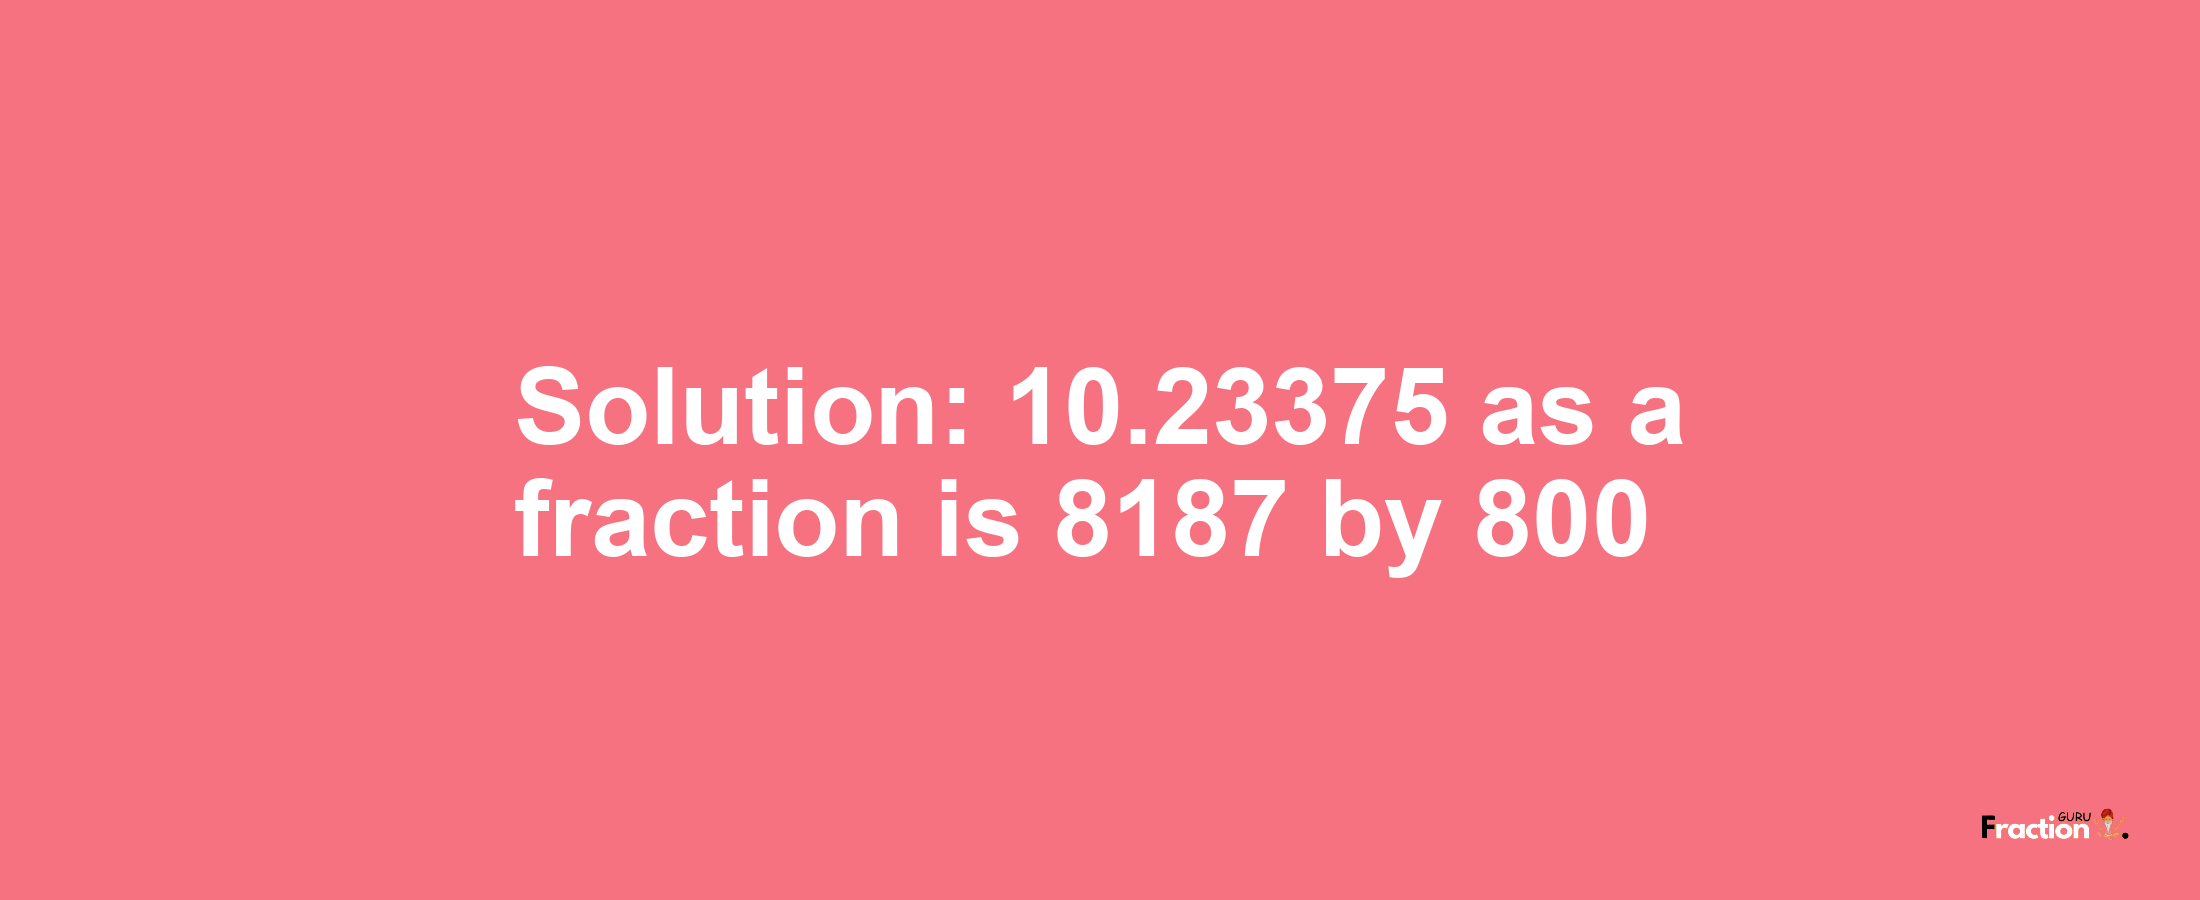 Solution:10.23375 as a fraction is 8187/800